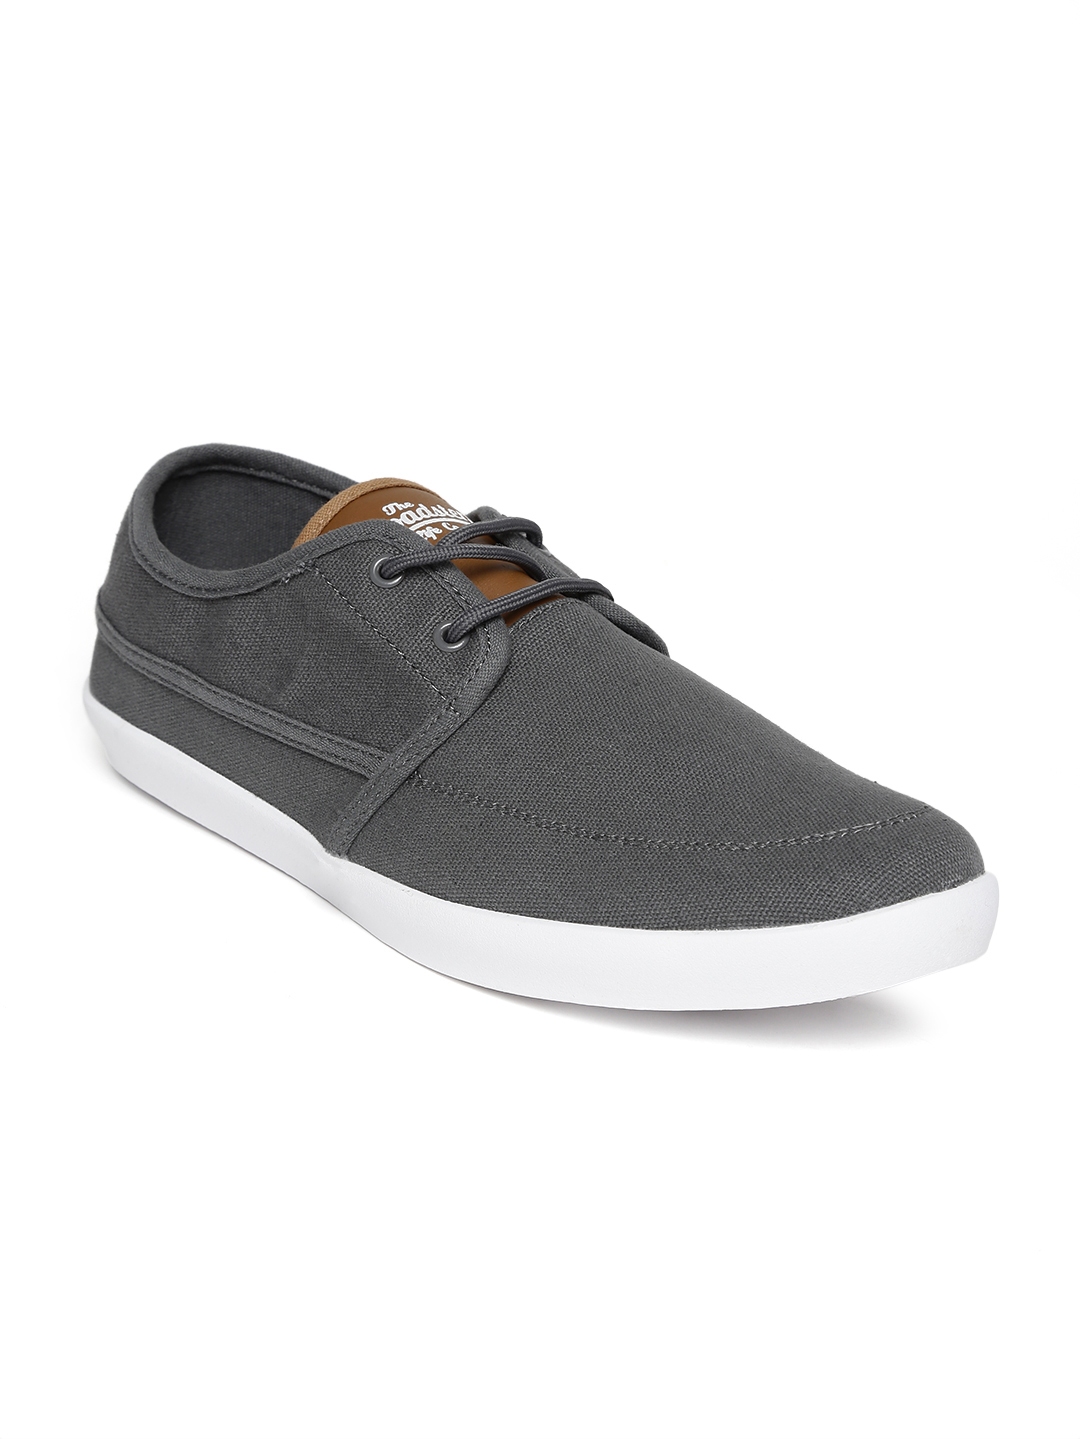 Buy Roadster Men Grey Canvas Shoes - Casual Shoes for Men 856916 | Myntra